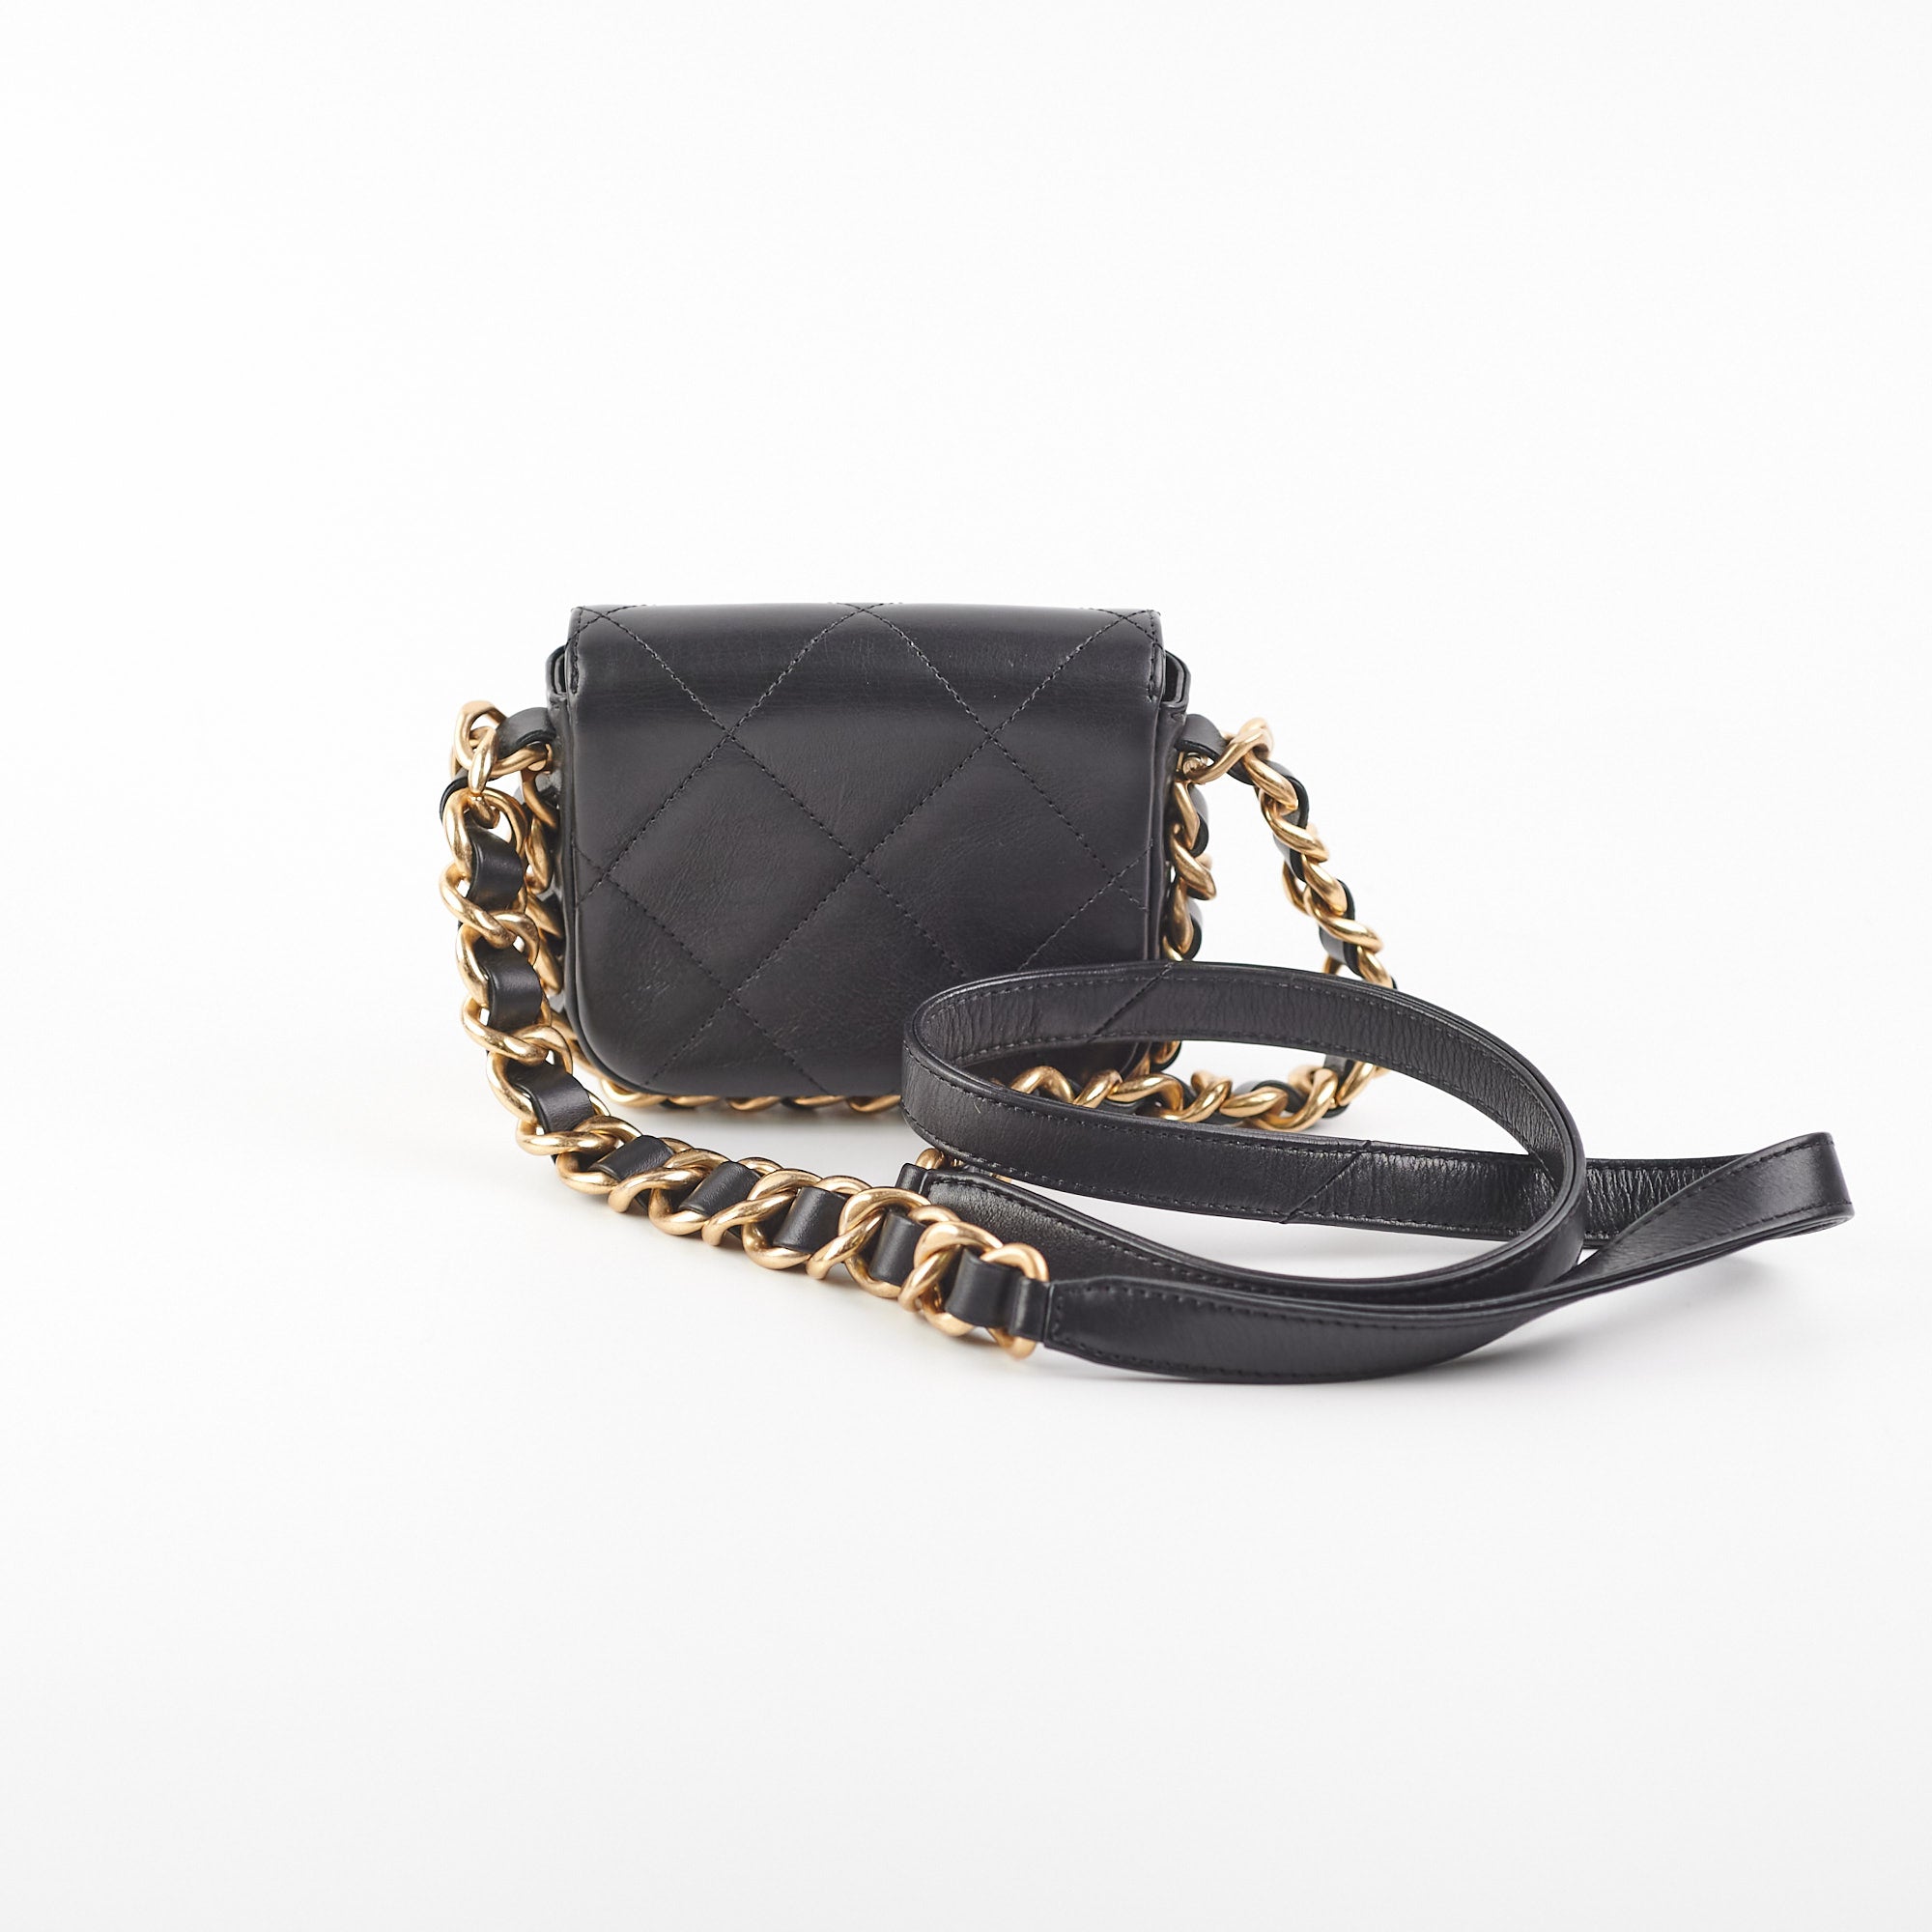 Chanel Heart Clutch With Chain 22S Mini Black Lambskin in Lambskin Leather  with Goldtone  US